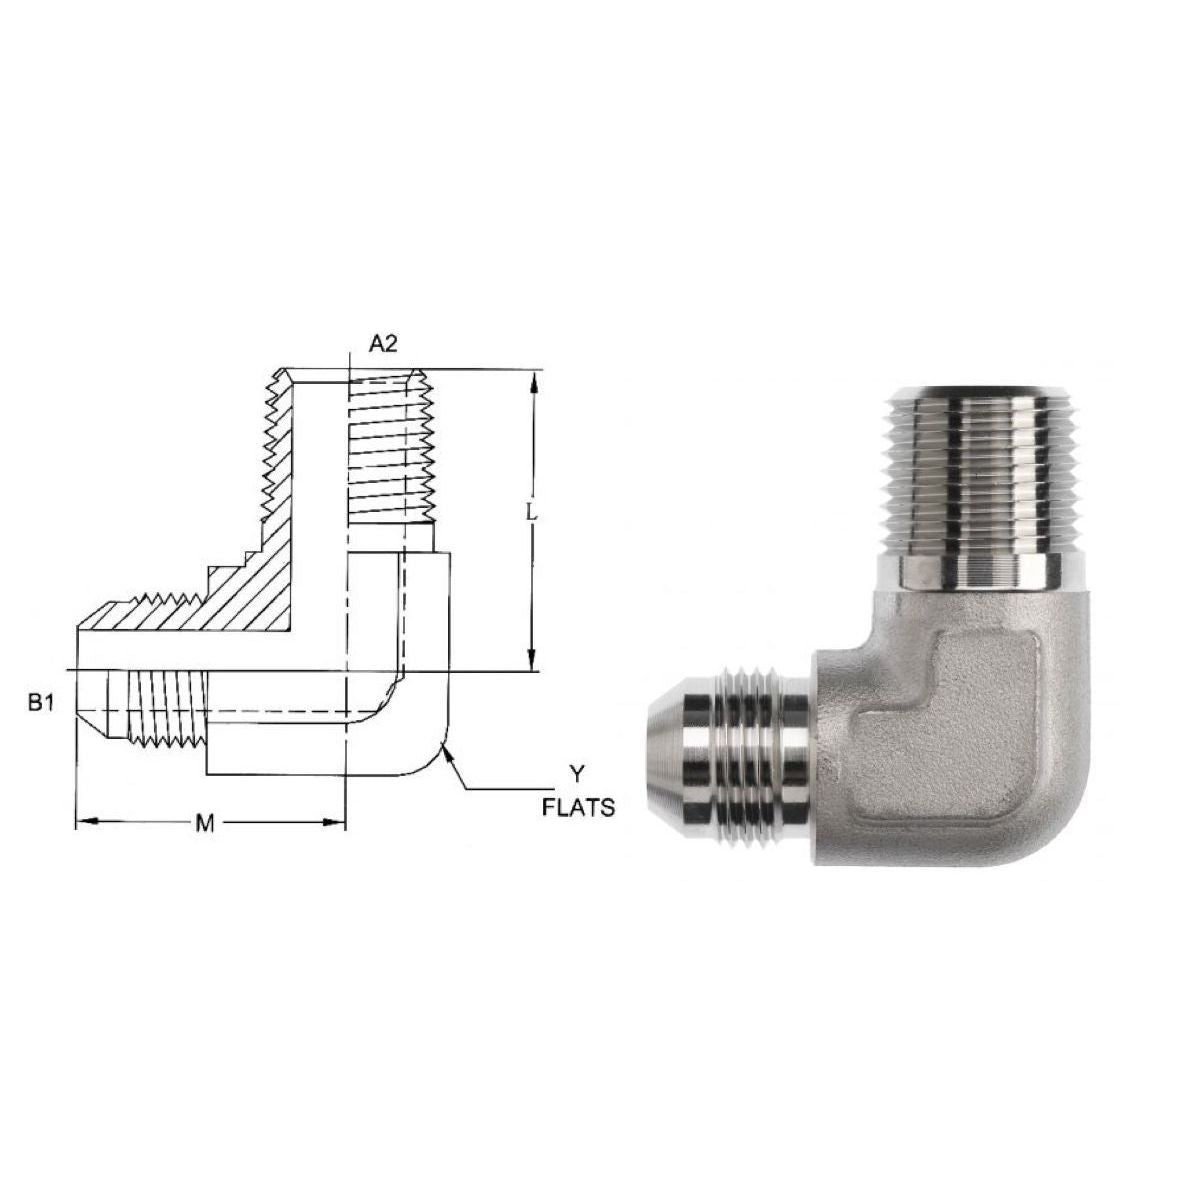 2501-06-06-SS : OneHydraulics 90-Degree Elbow, 0.375 (3/8) Male JIC x 0.375 (3/8) Male NPT, Stainless Steel, 7200psi